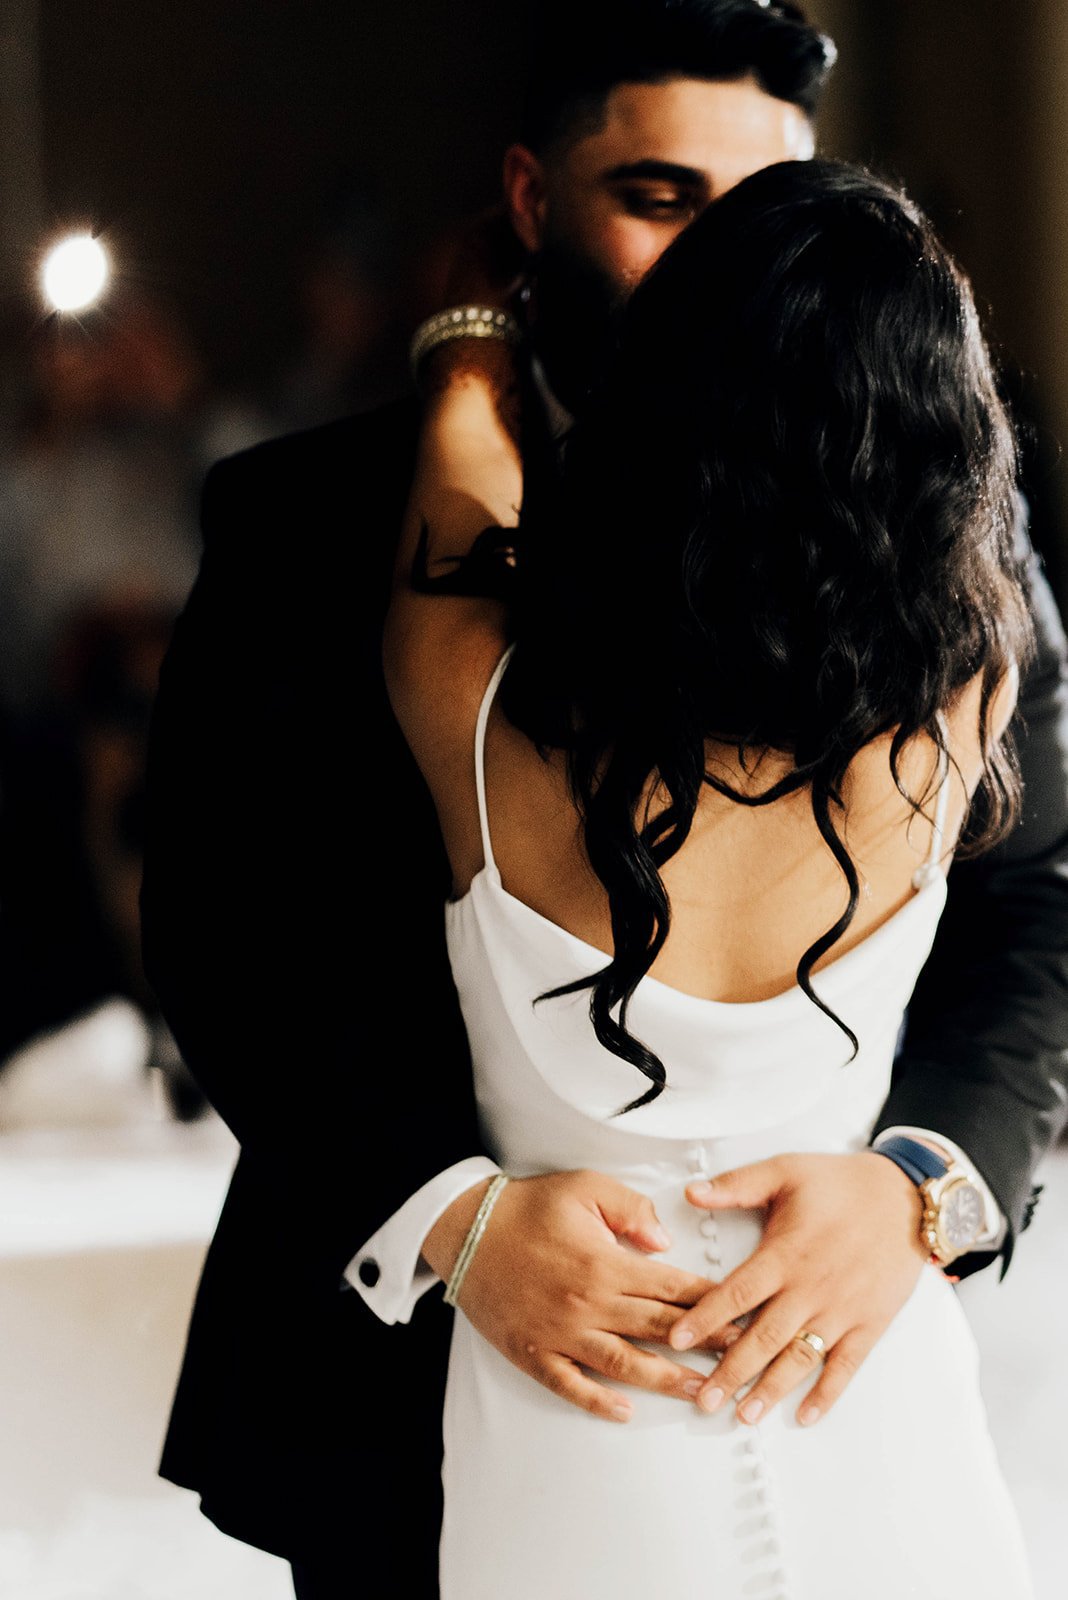 A groom rests his hands on the small of his wife's back during their first dance.